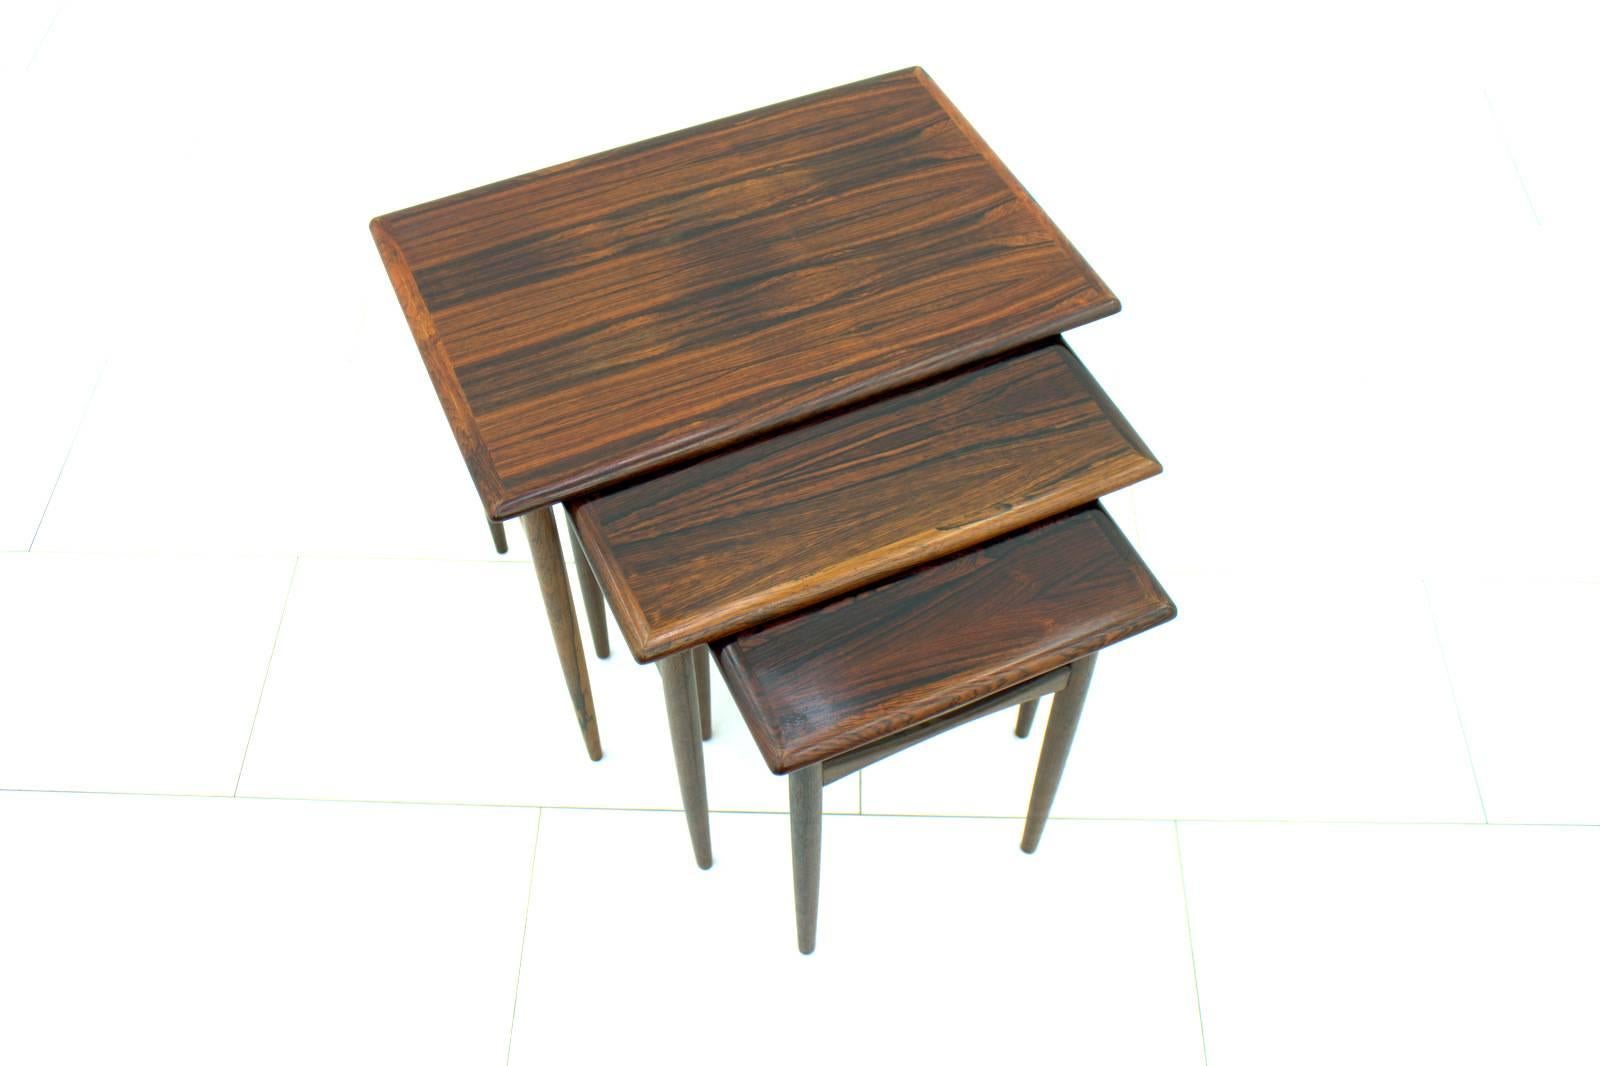 nesting tables, Denmark, 1960s.
Very good condition.

Worldwide shipping.